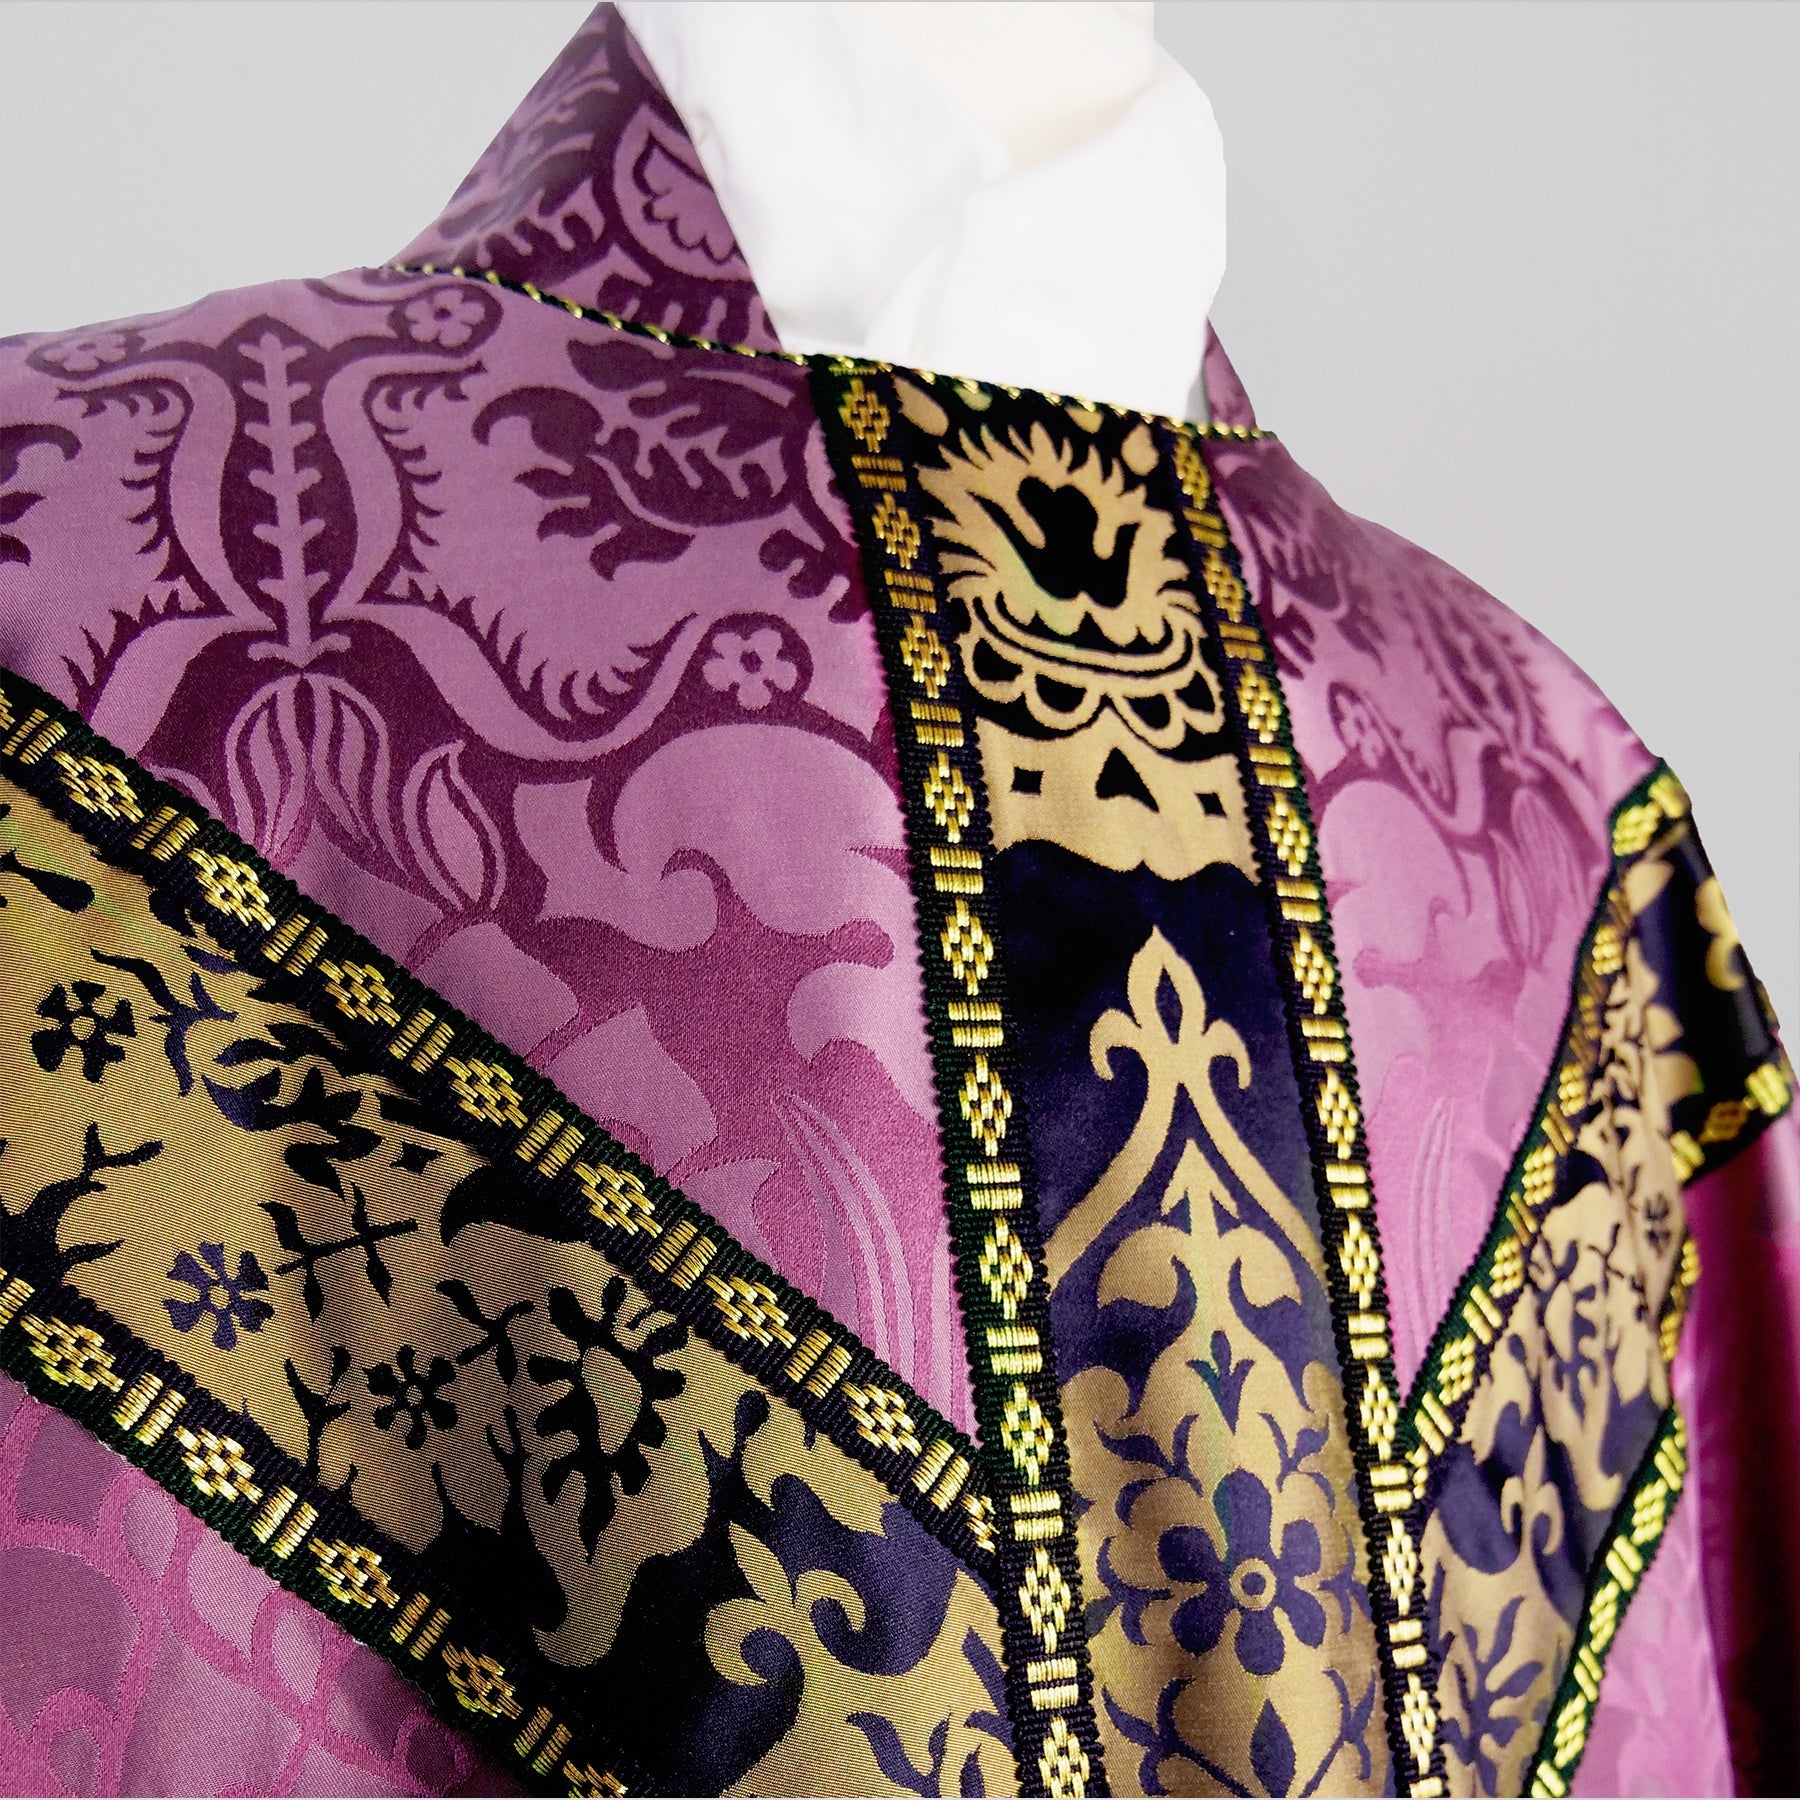 Full Gothic Chasuble in Comper Purple 'Comper Cathedral' with Black/Gold 'Gothic' Orphreys - Watts & Co.